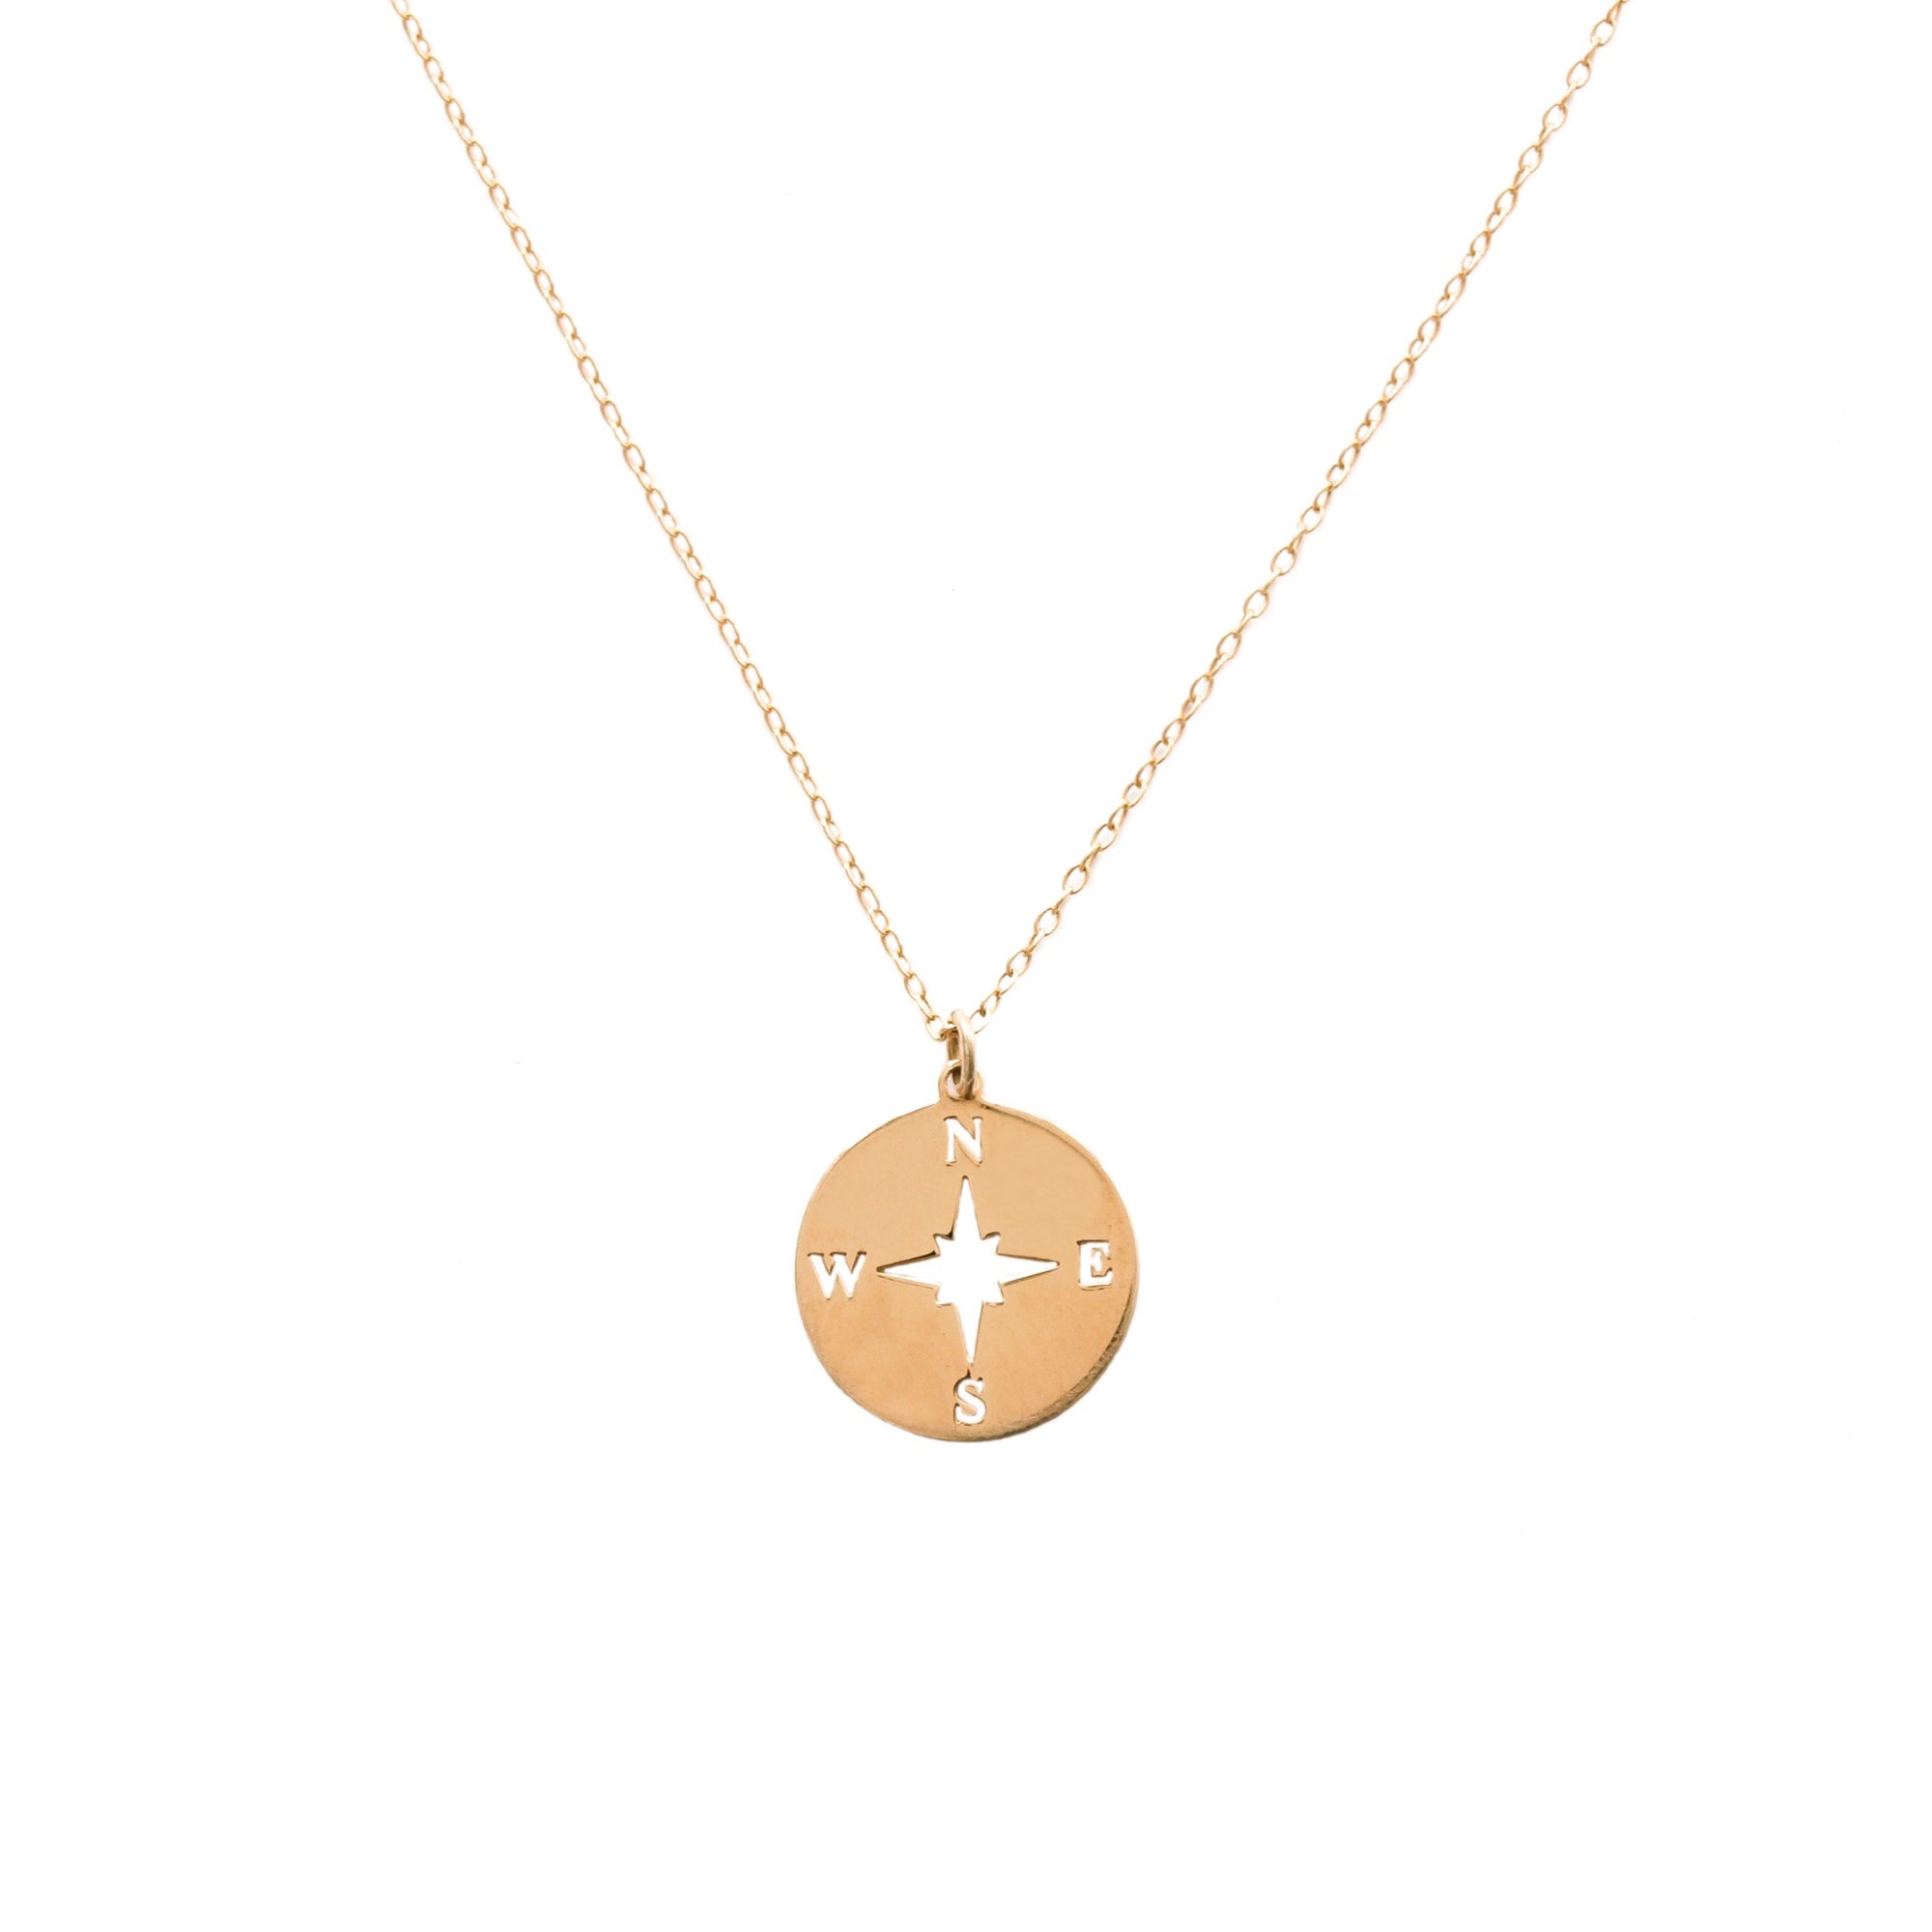 Compass rose gold - 15 mm - ByMirelae